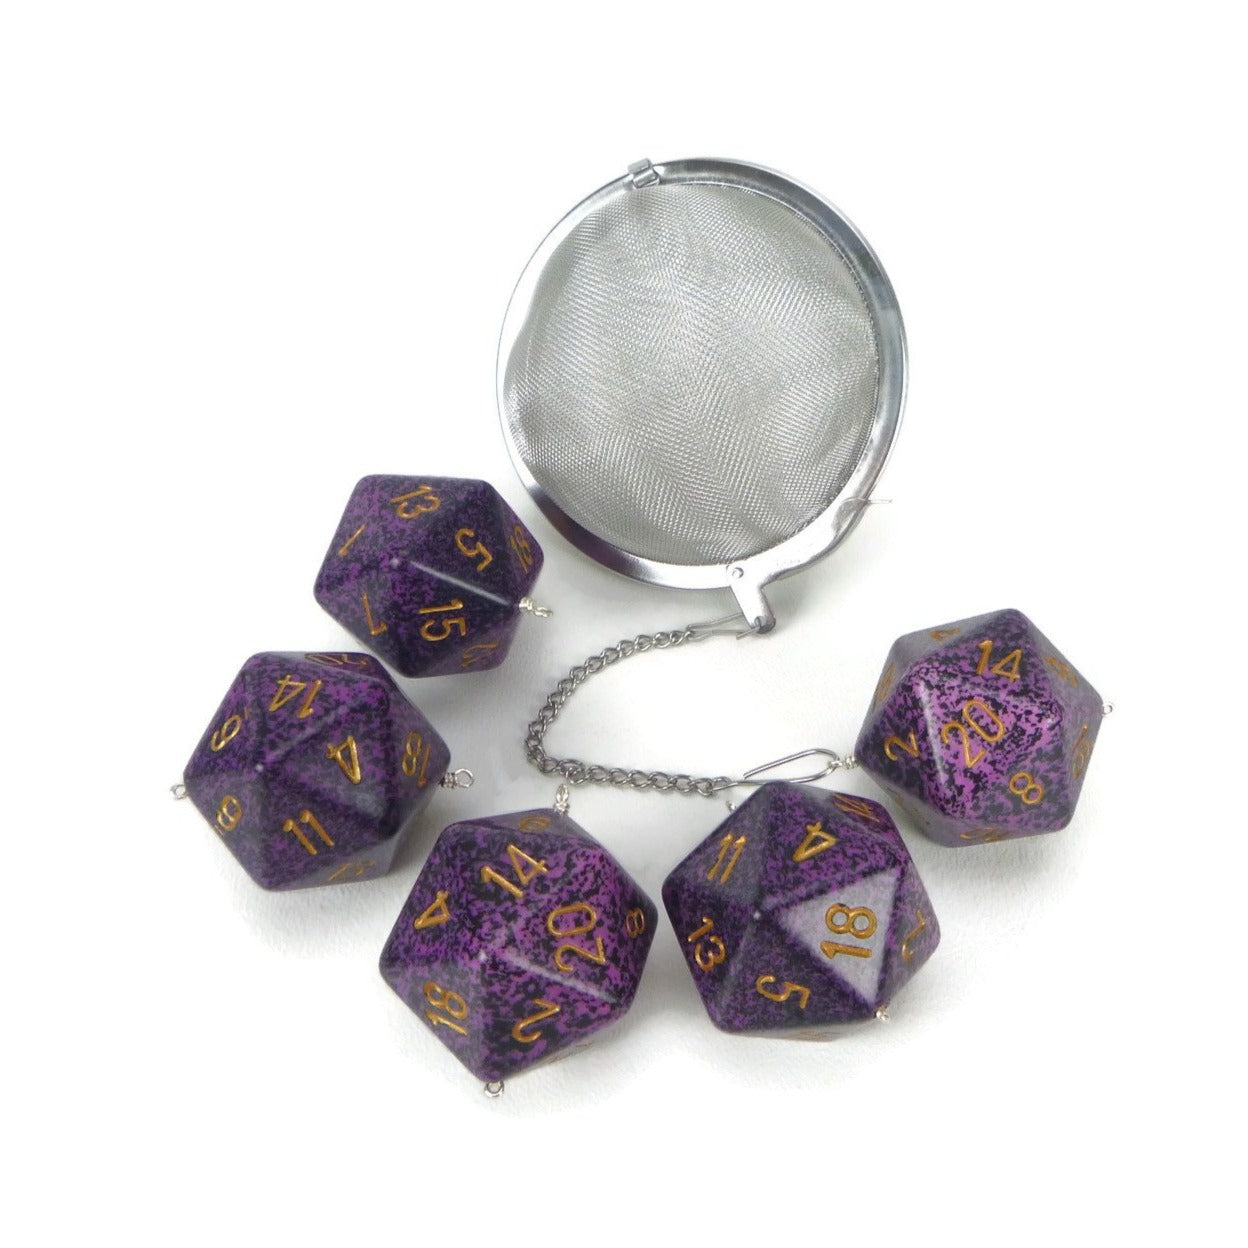 3 Inch Tea Infuser Ball with Large d20 - Hurricane Purple